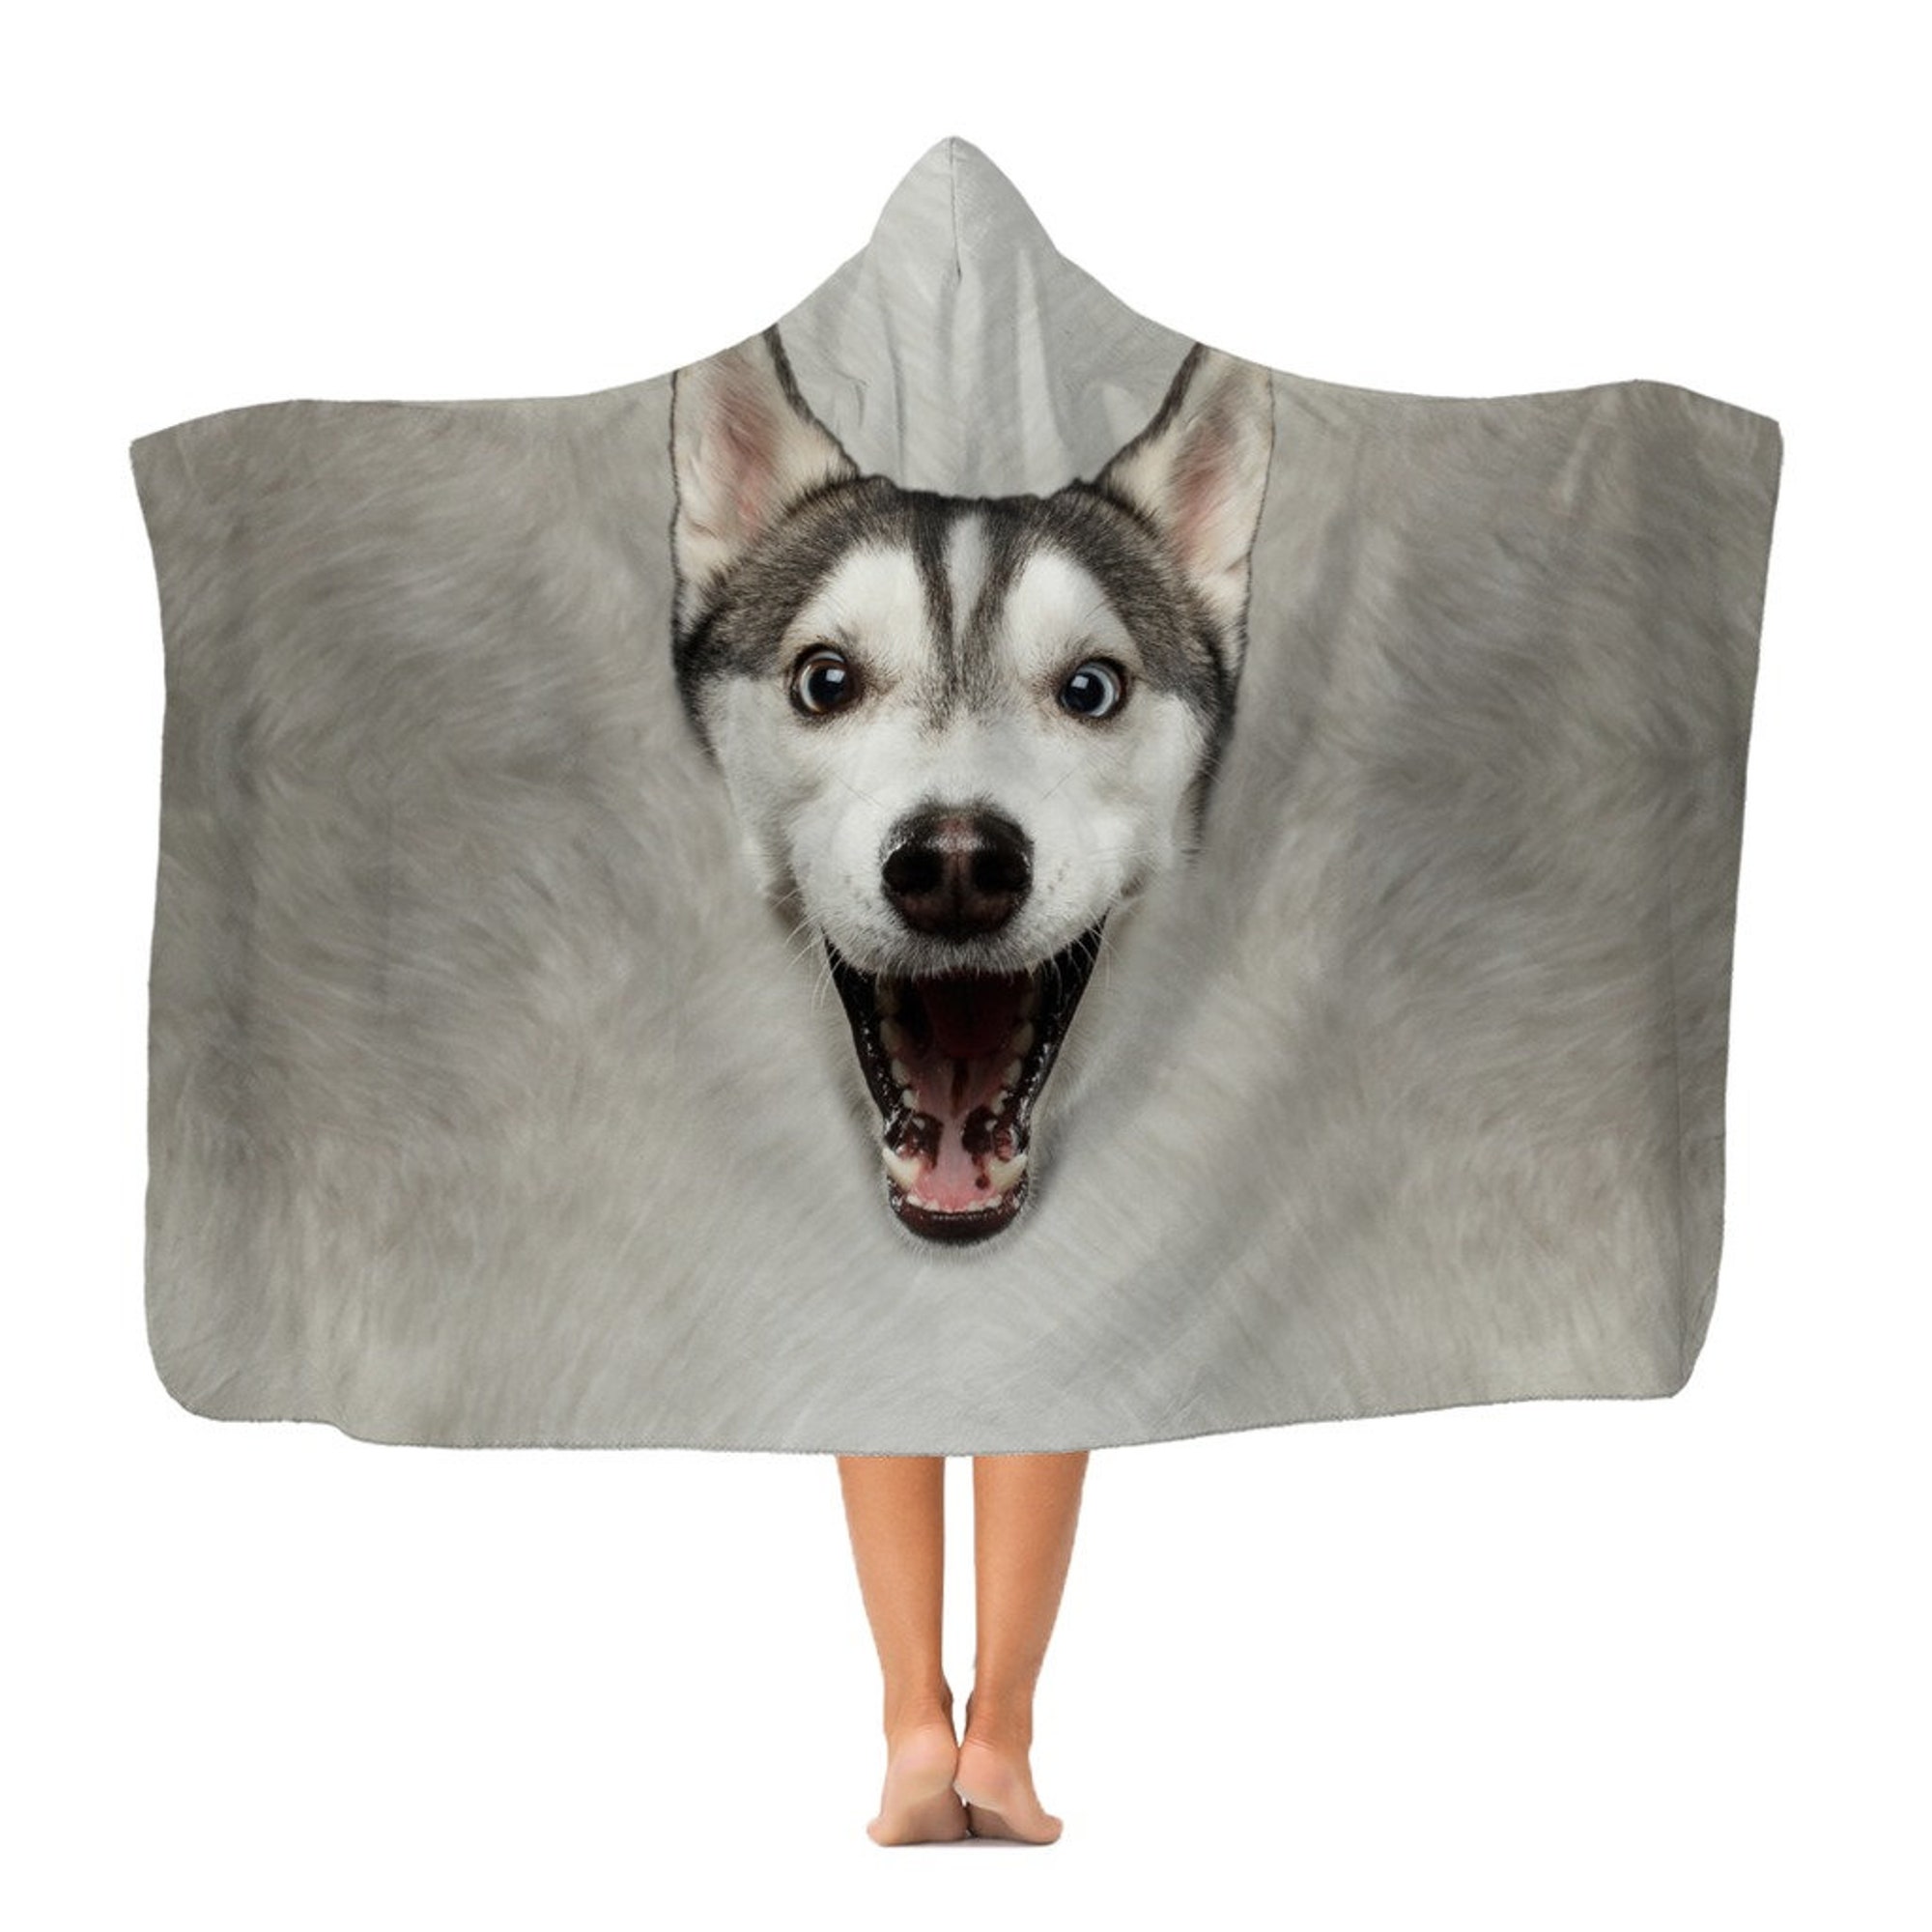 Husky Dog Funny Classic Adult and Kids Hooded Blanket